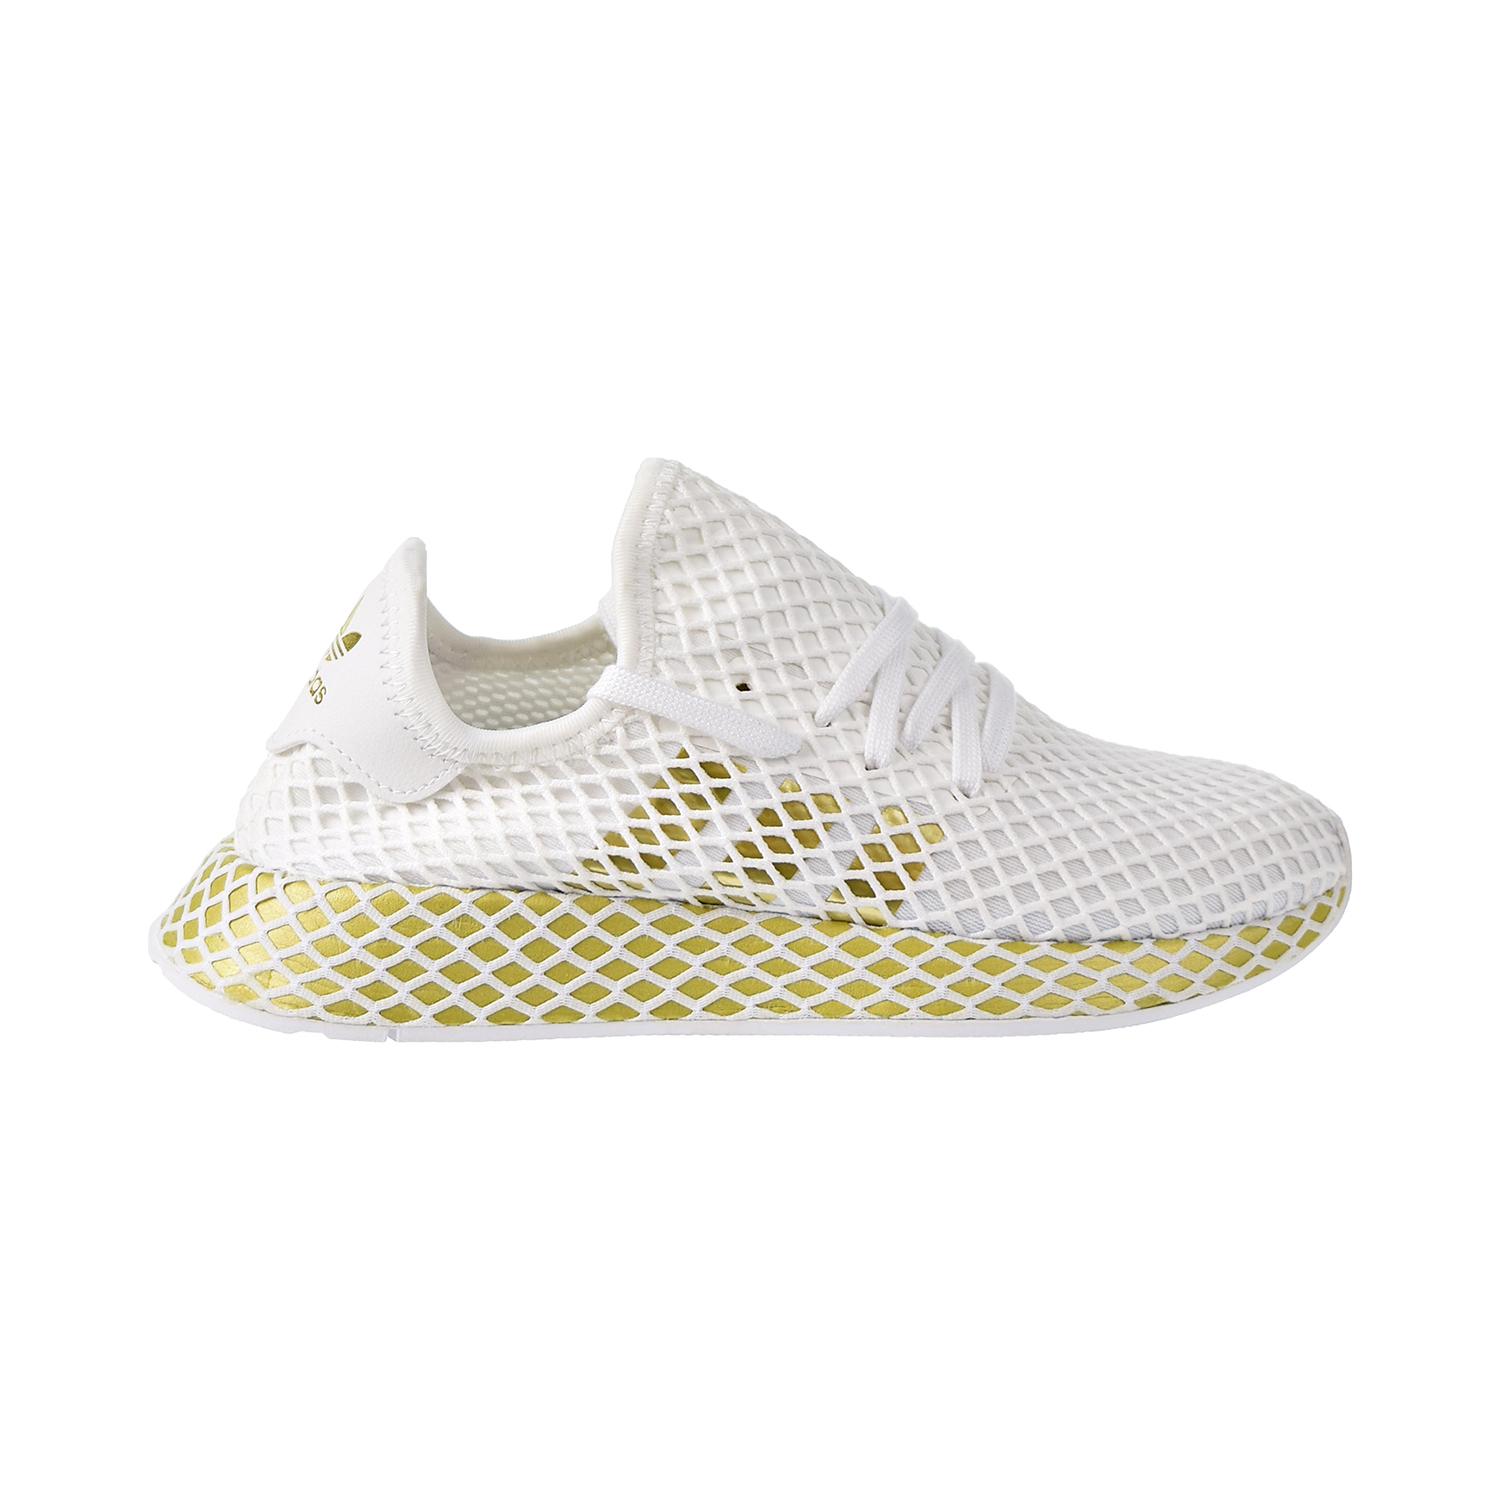 Reserve exposition Fictitious Adidas Deerupt Runner Womens Shoes Footwear White-Gold Metallic-Footwear  White cg6087